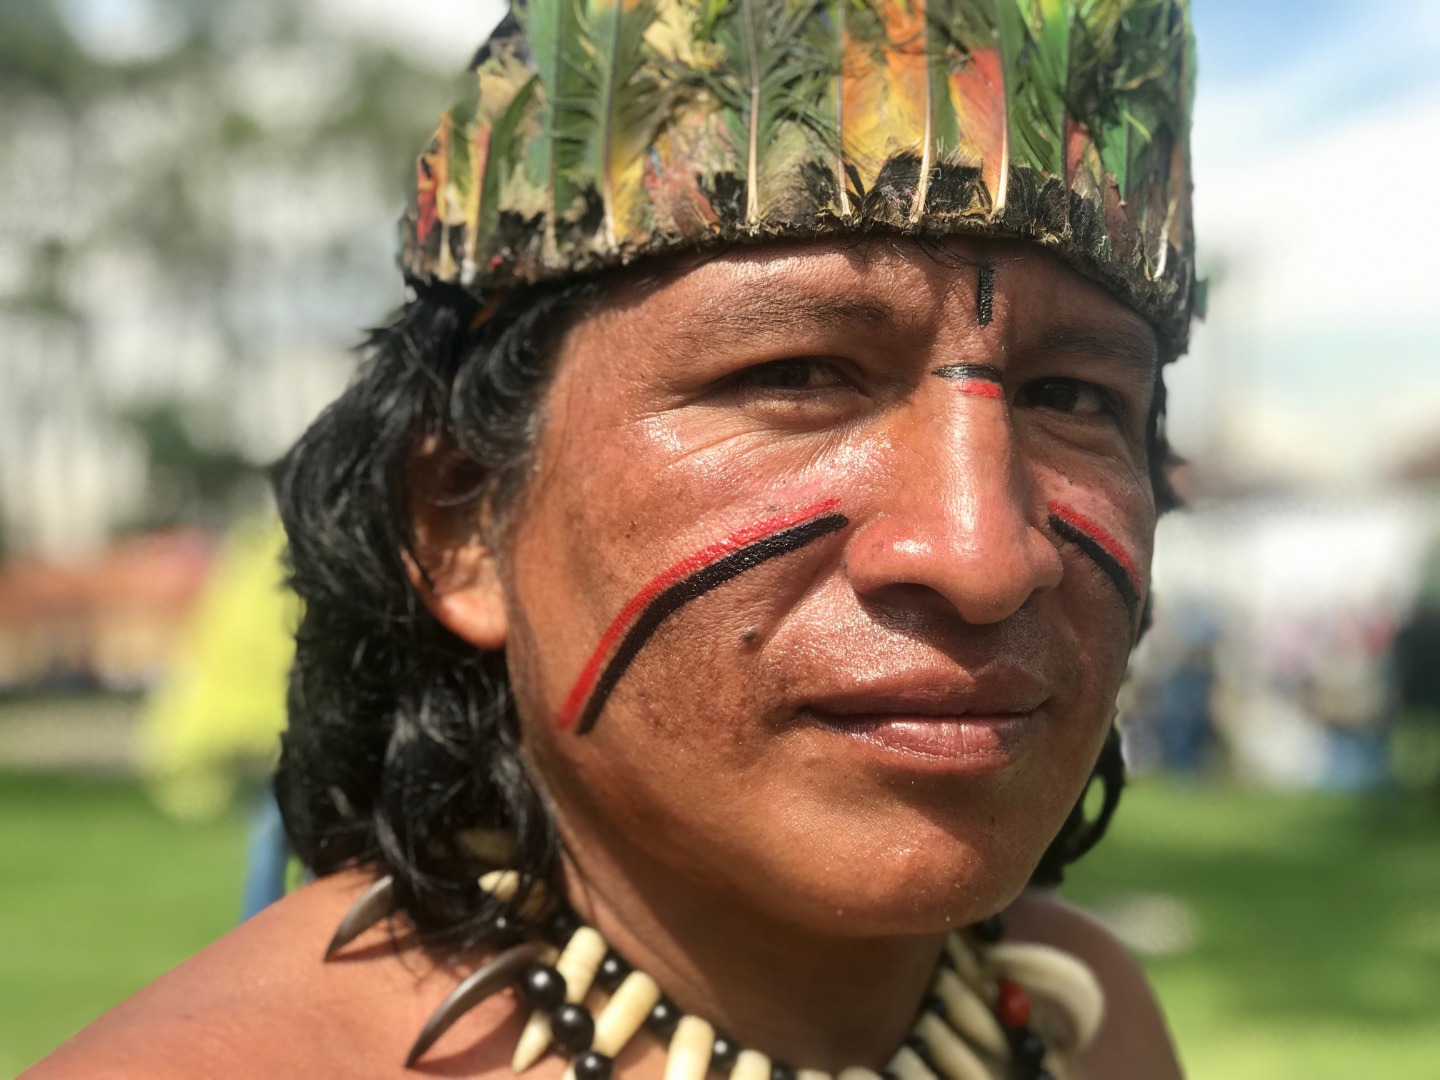 David Taicus, from the Amazon's Awa indigenous community, is pictured on the grounds of Colombia's National University in Bogota in December 2019 attending the national strike. Photo_ Steven Grattan (1) (1).jpg